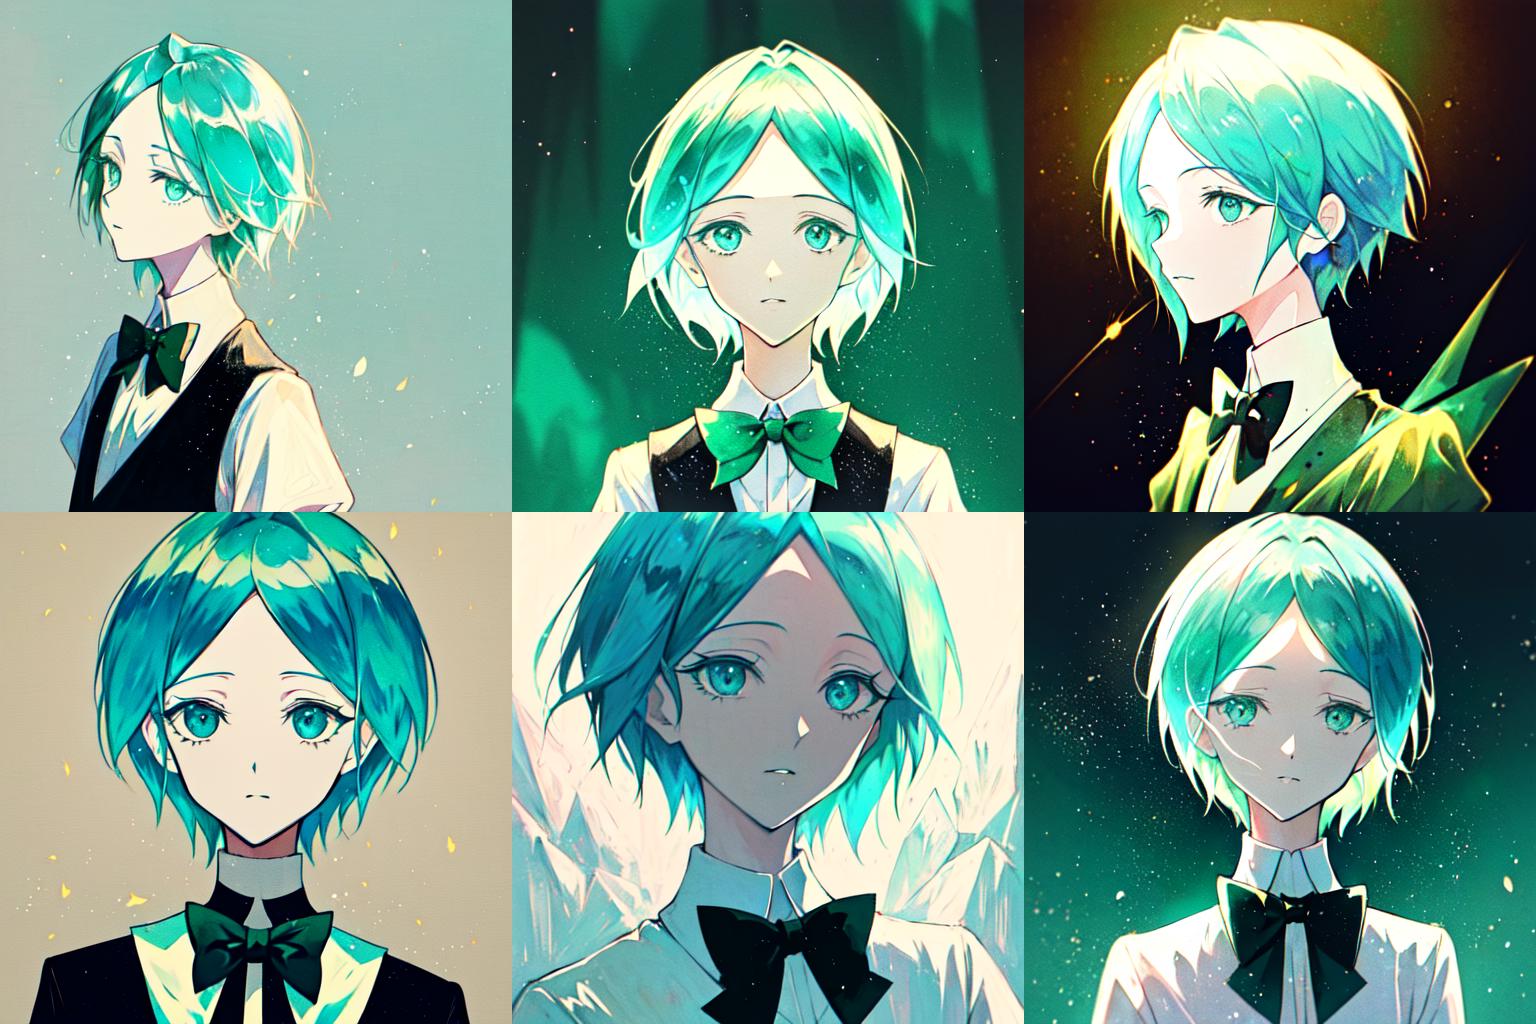 Phosphophyllite from Land of the Lustrous (Houseki no Kuni) image by bluelovers